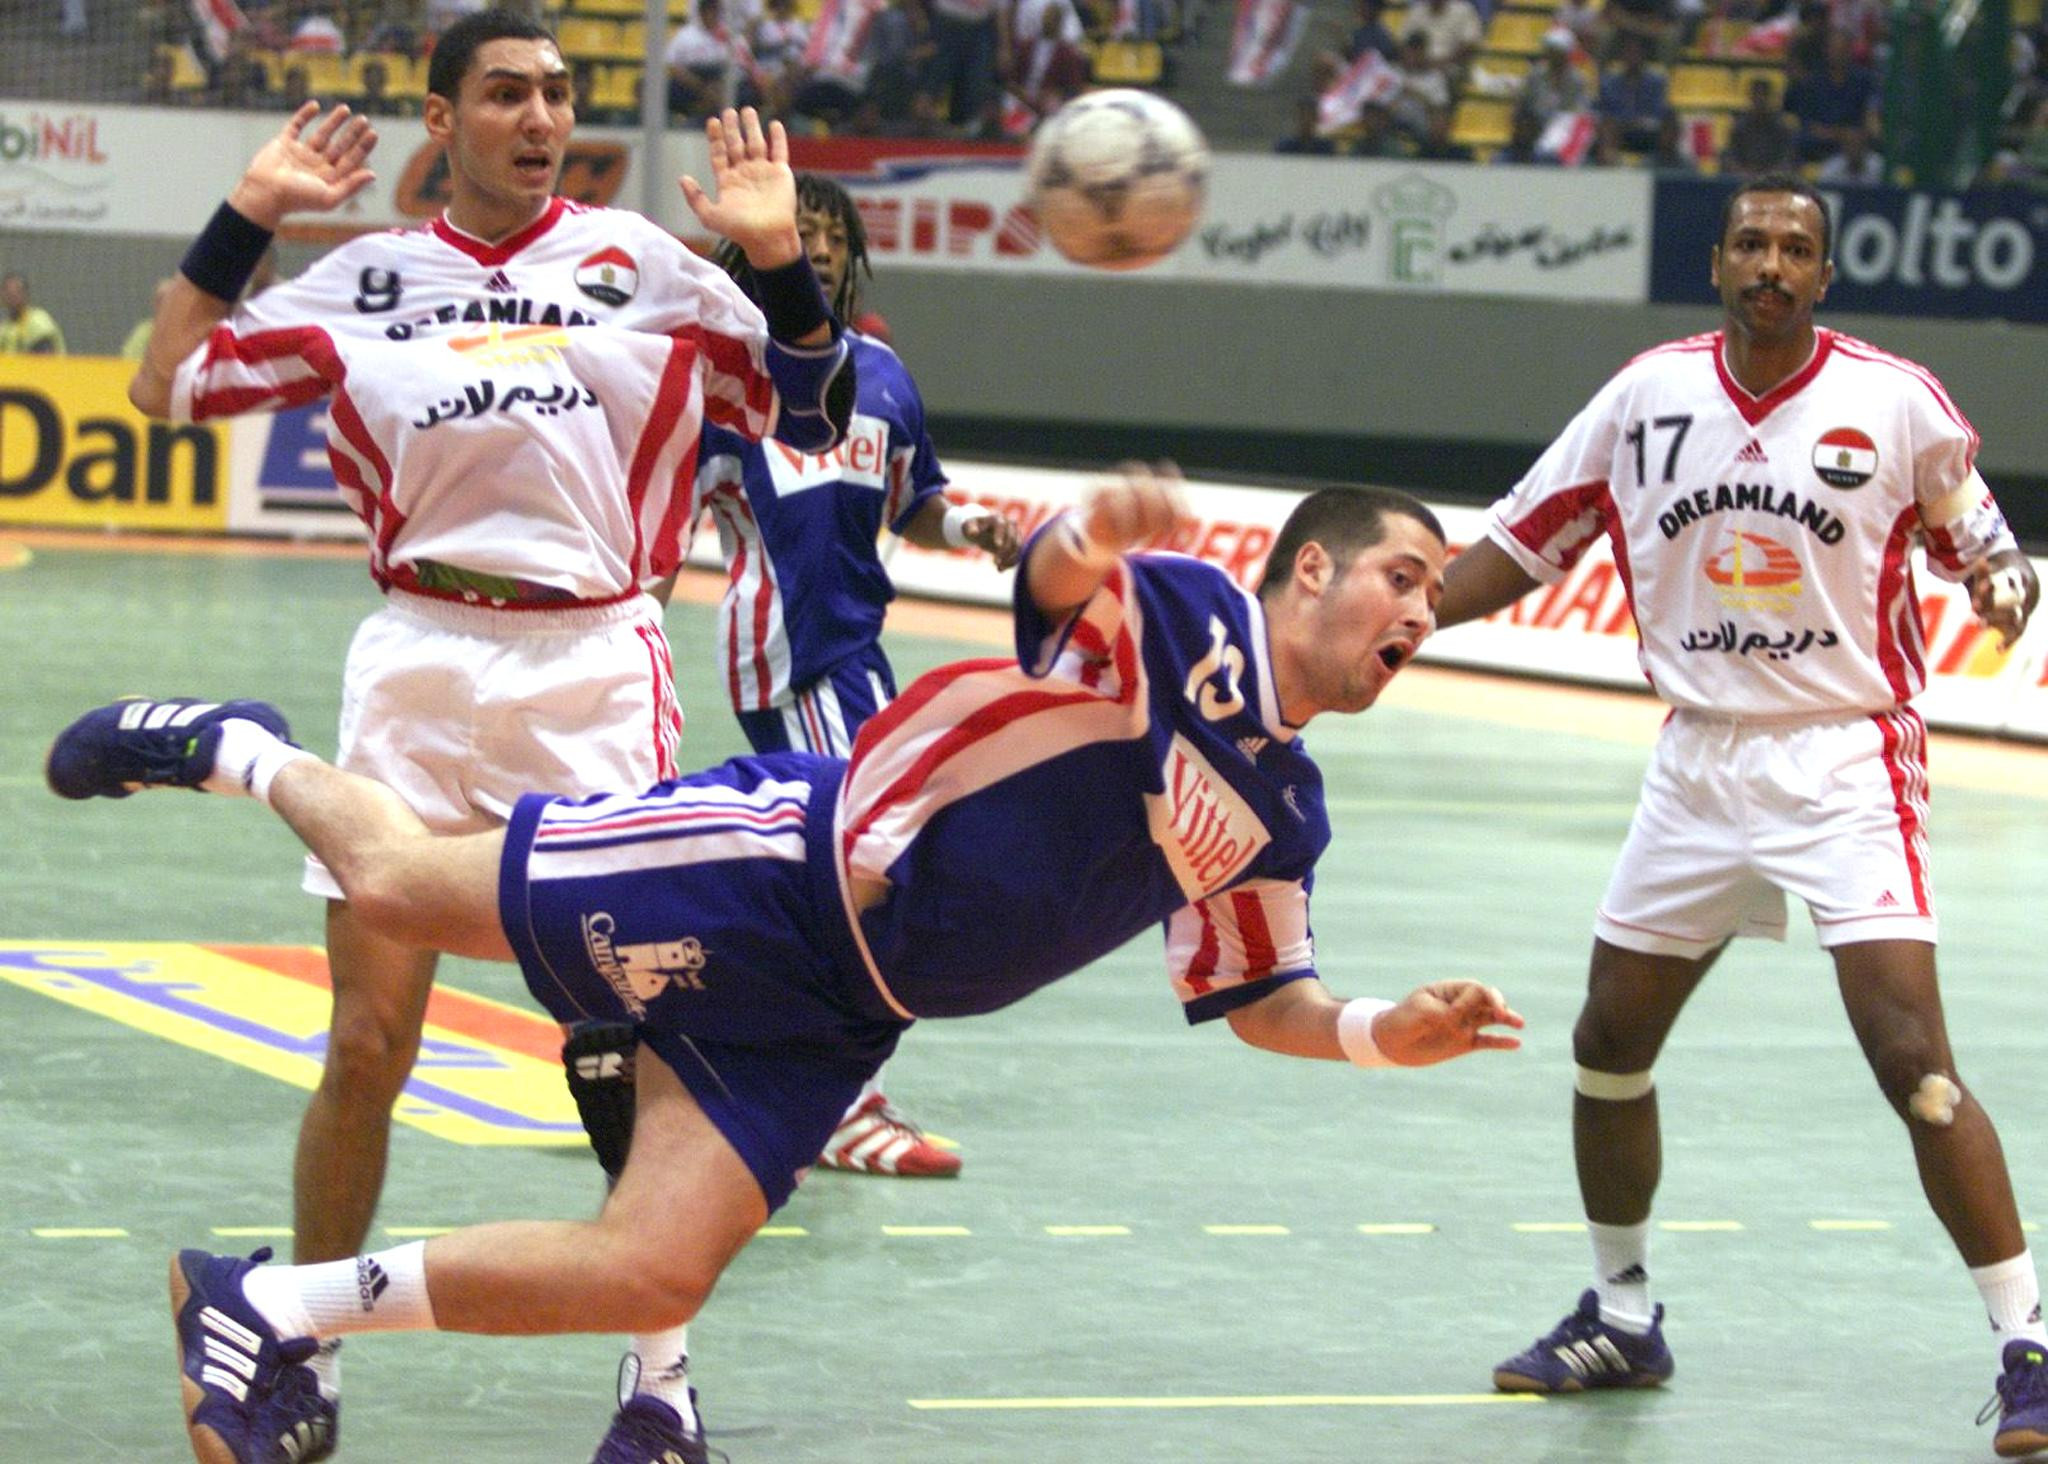 Egypt is set to host the Men's Handball World Championship for the second time - the first being in 1999 ©Getty Images